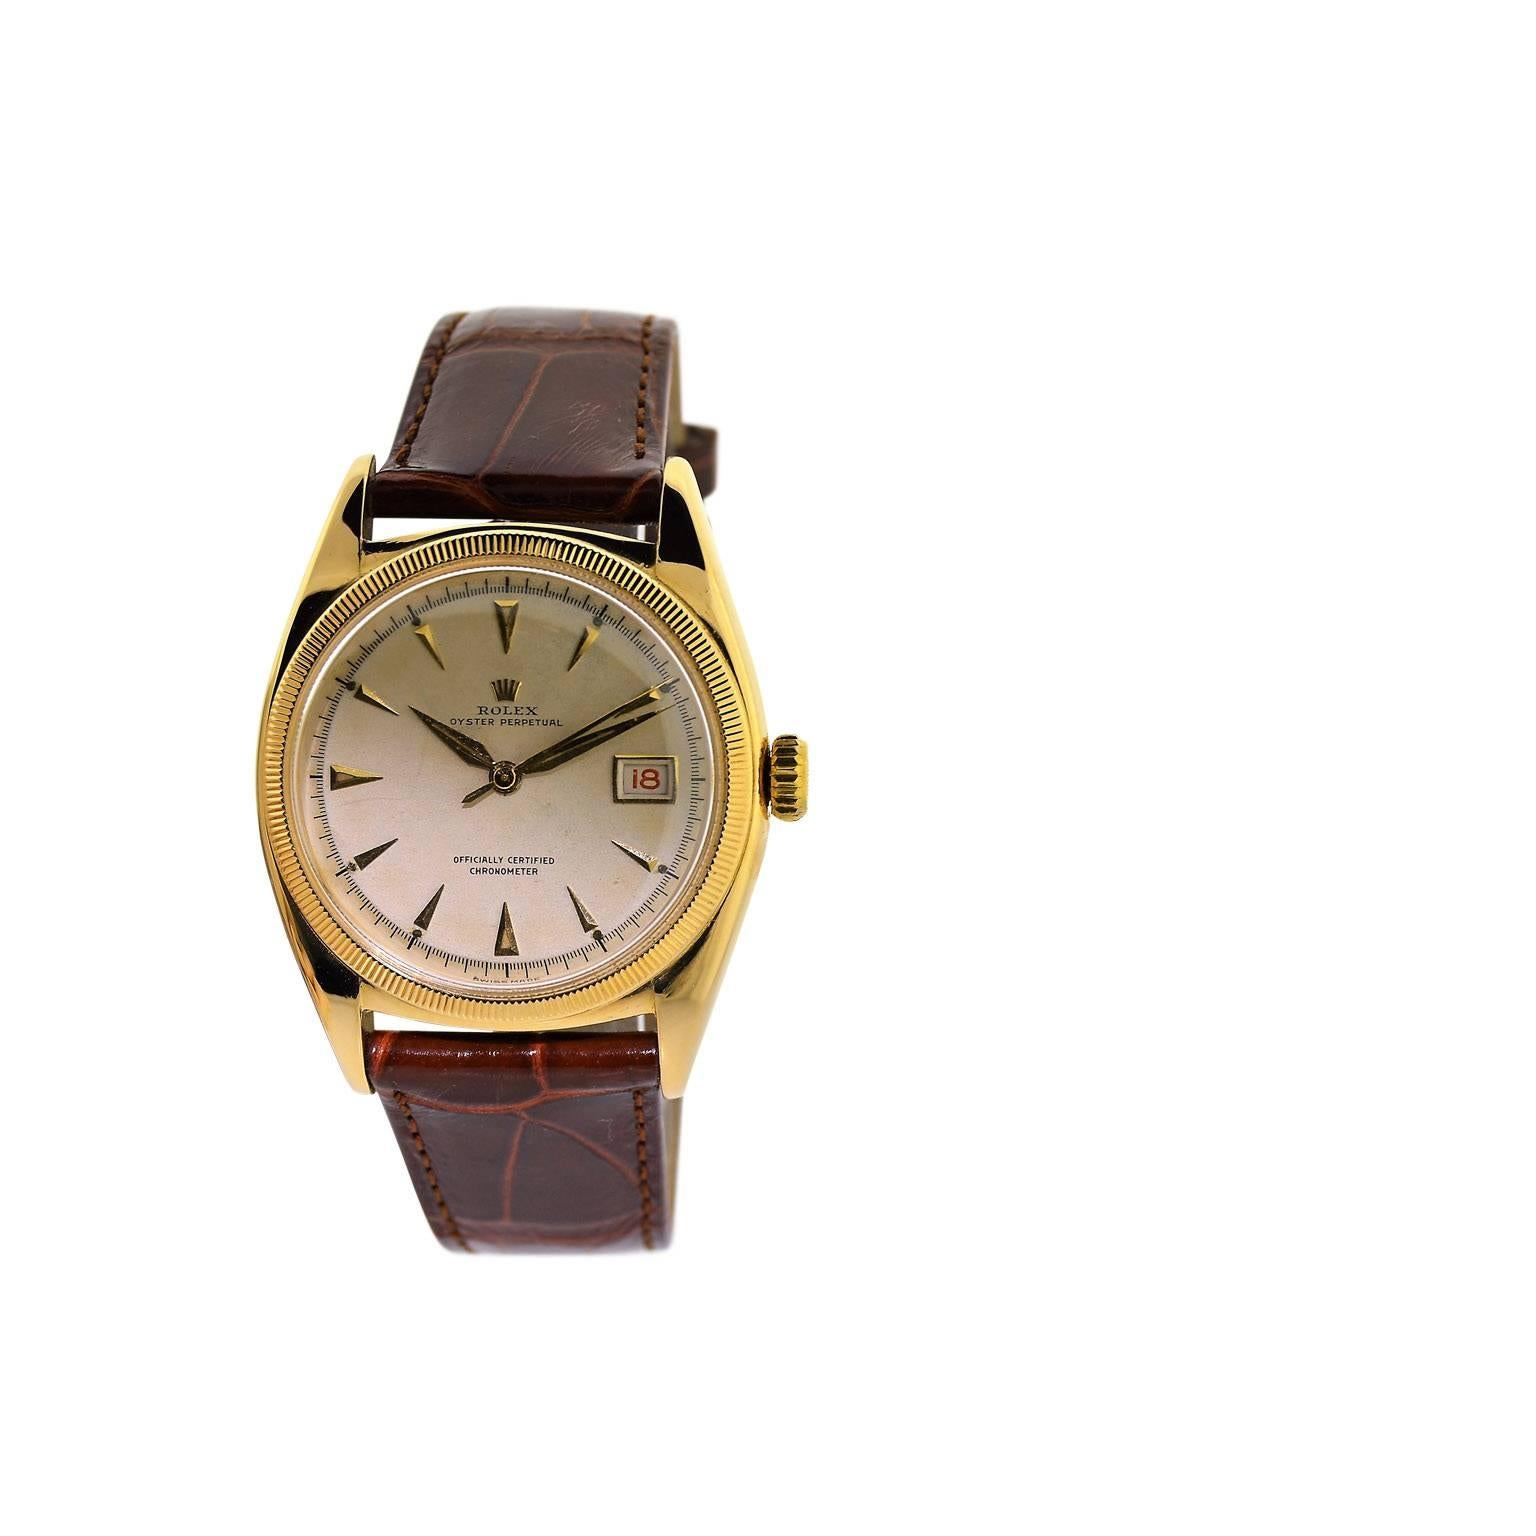 Women's or Men's Rolex Gold Ovettone Original Dial Perpetual Watch, From 1949 Anyone Turning 68?